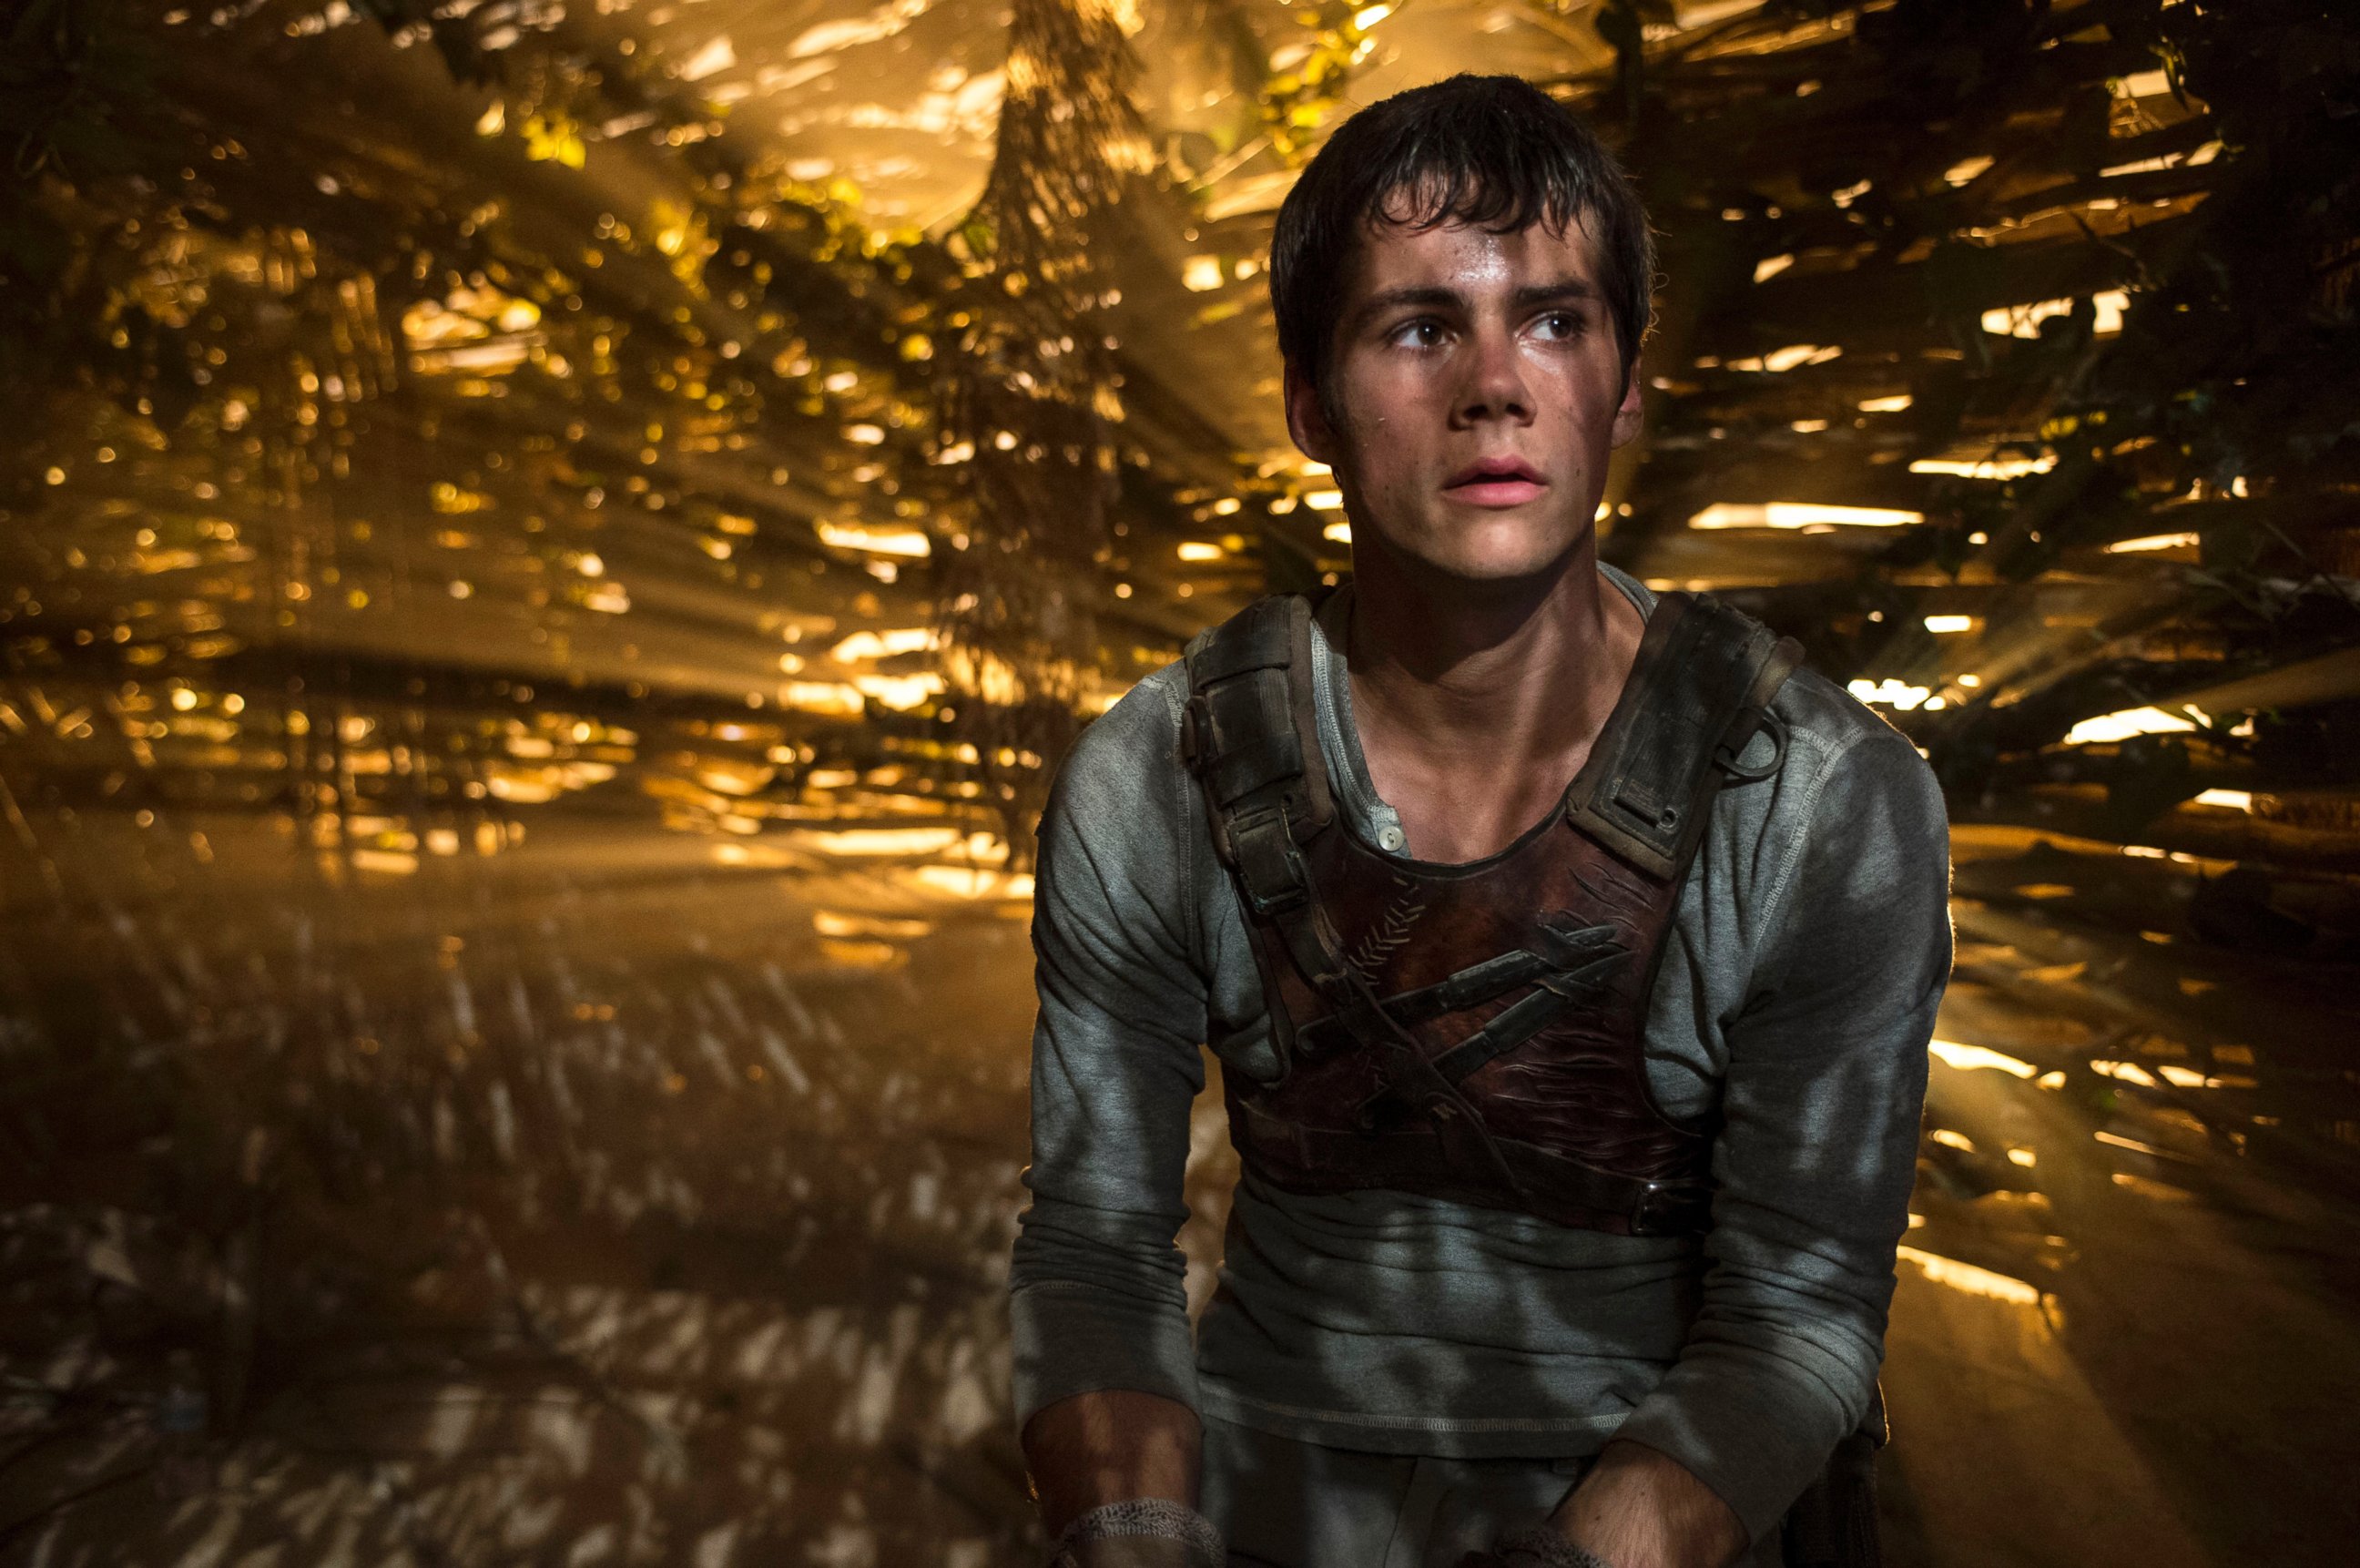 PHOTO: In this image released by 20th Century Fox, Dylan O'Brien appears in a scene from "The Maze Runner." 